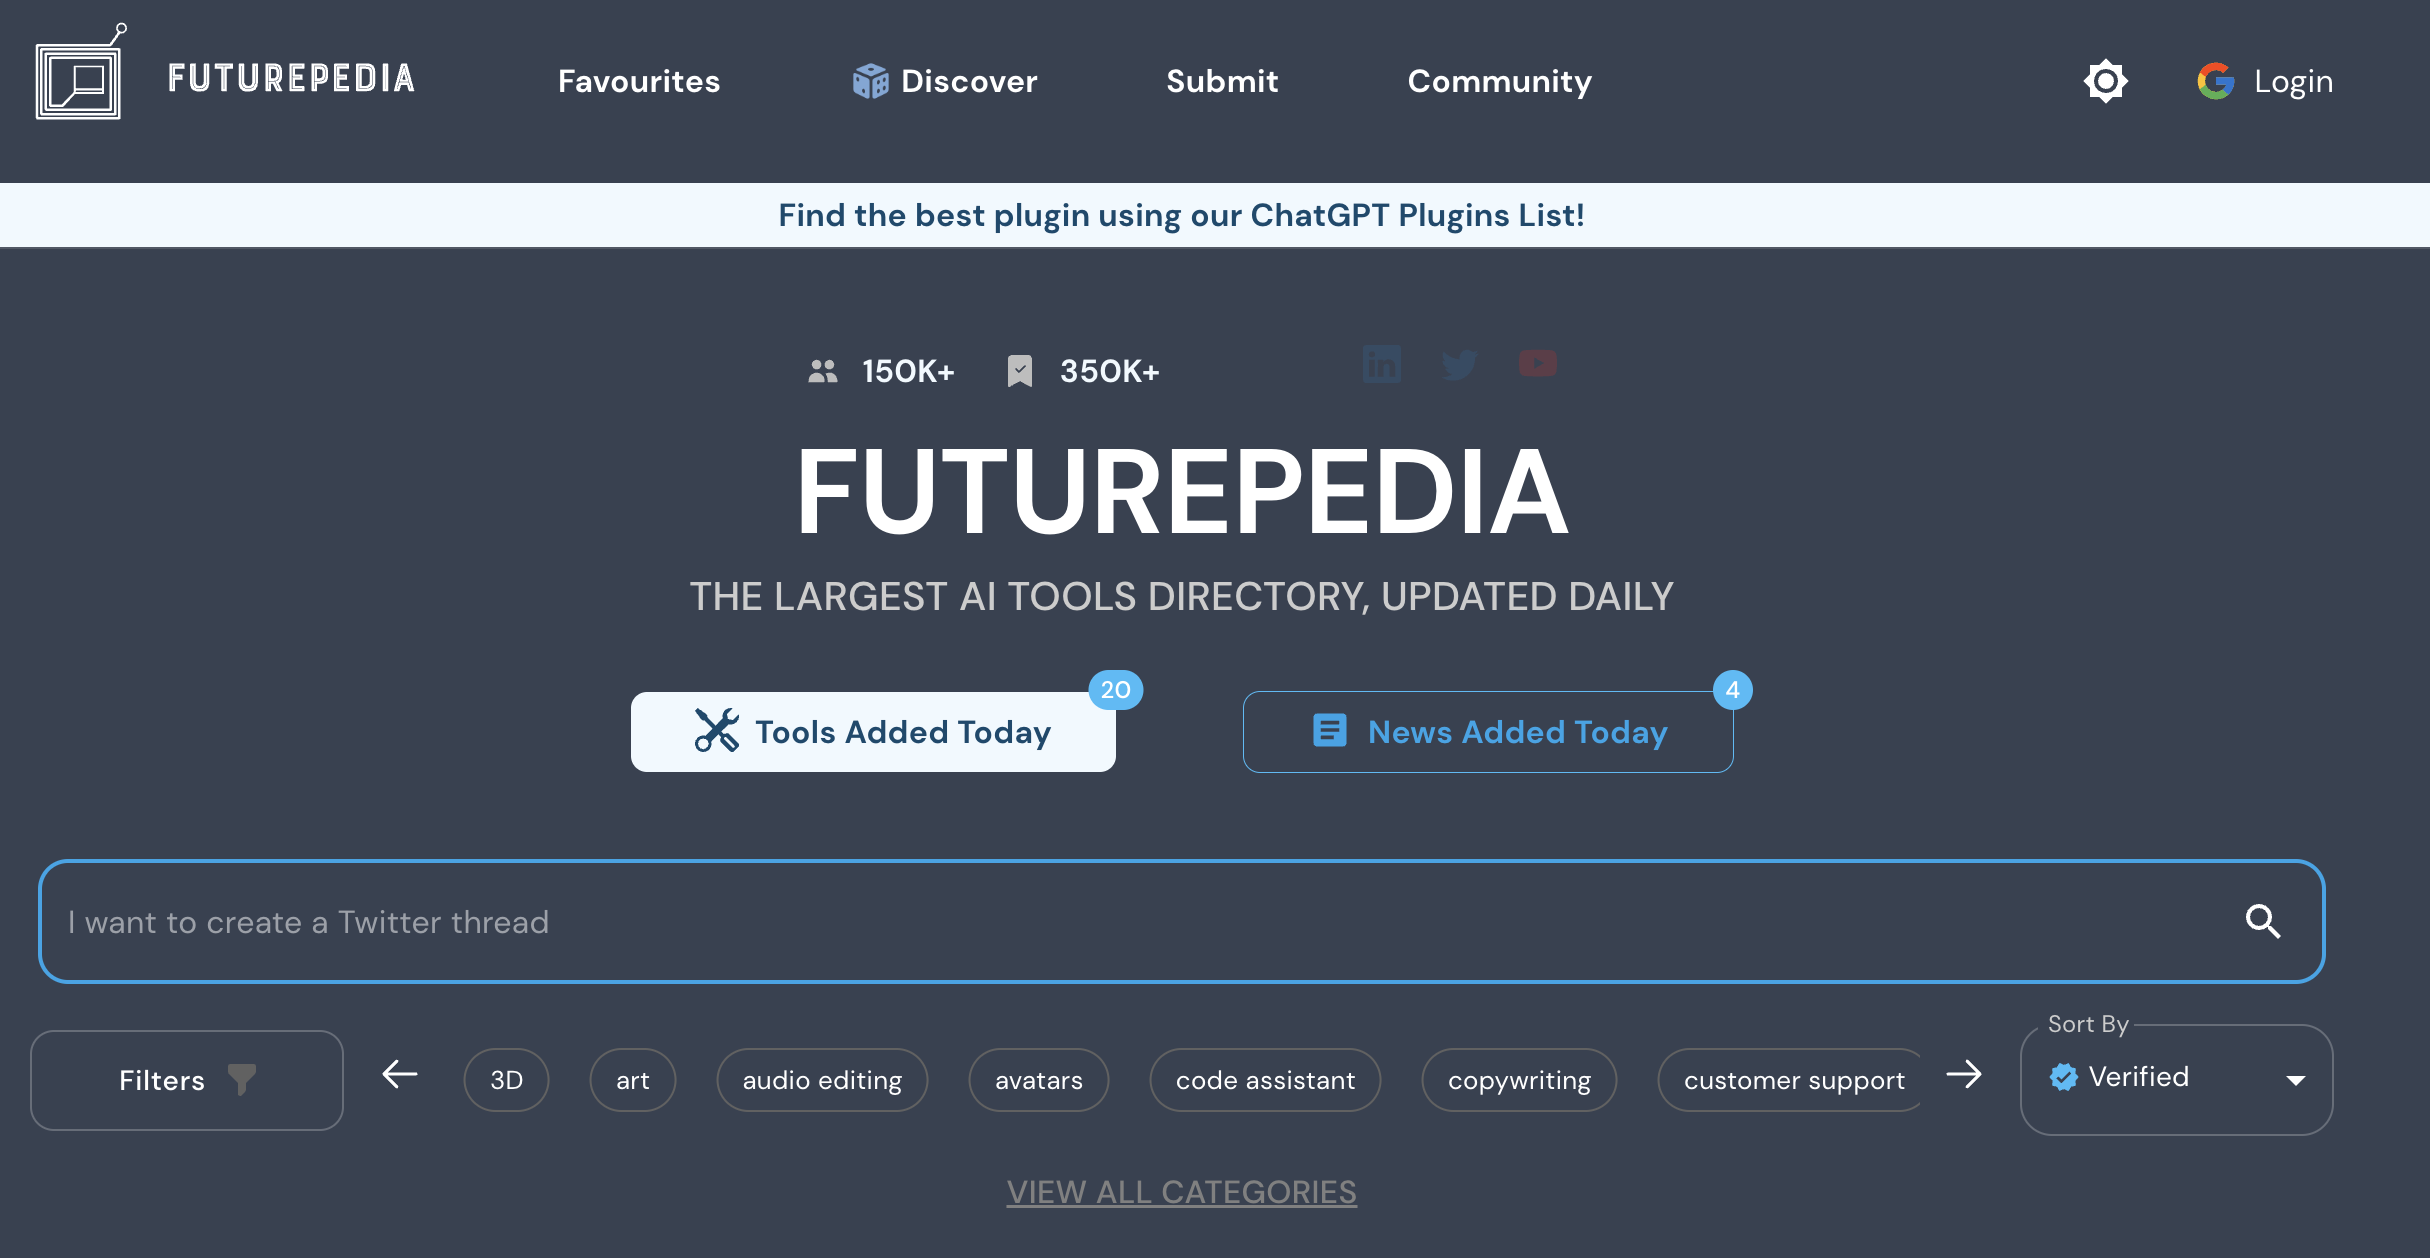 First on our list is one of the most amazing AI tool directories - Futurepedia. Its massive library of almost 4,000 tools and applications keeps growing as the list is updated daily.